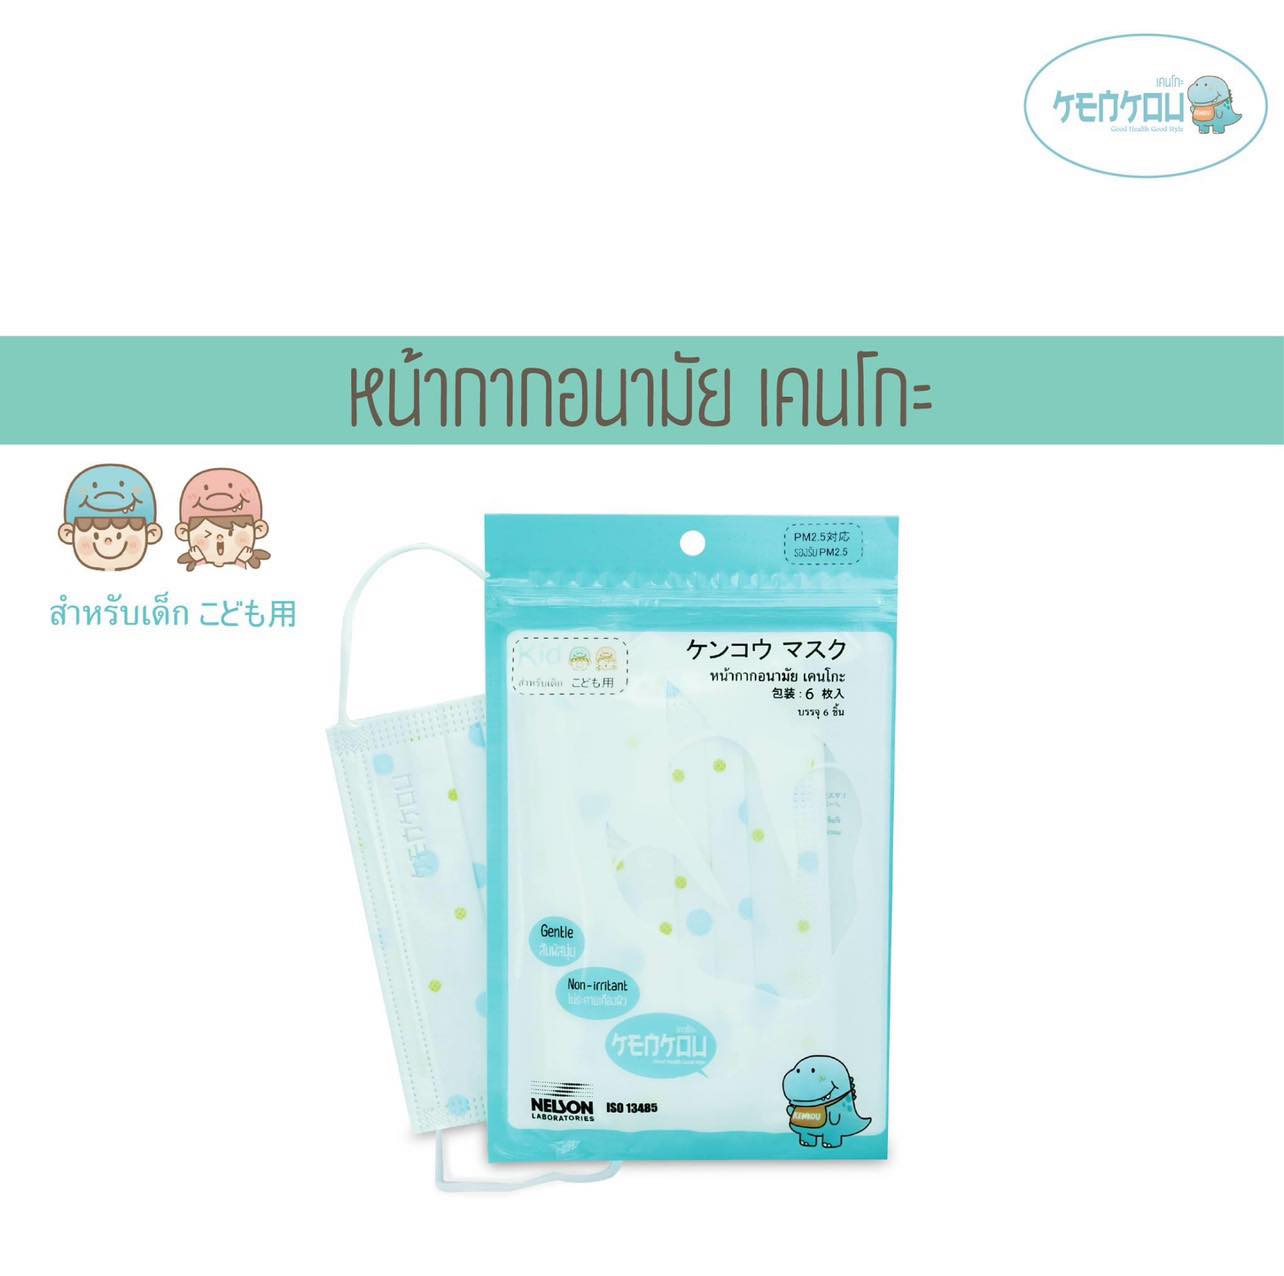 KENKOU face mask for kid or those with small faces containing 6pieces/pack